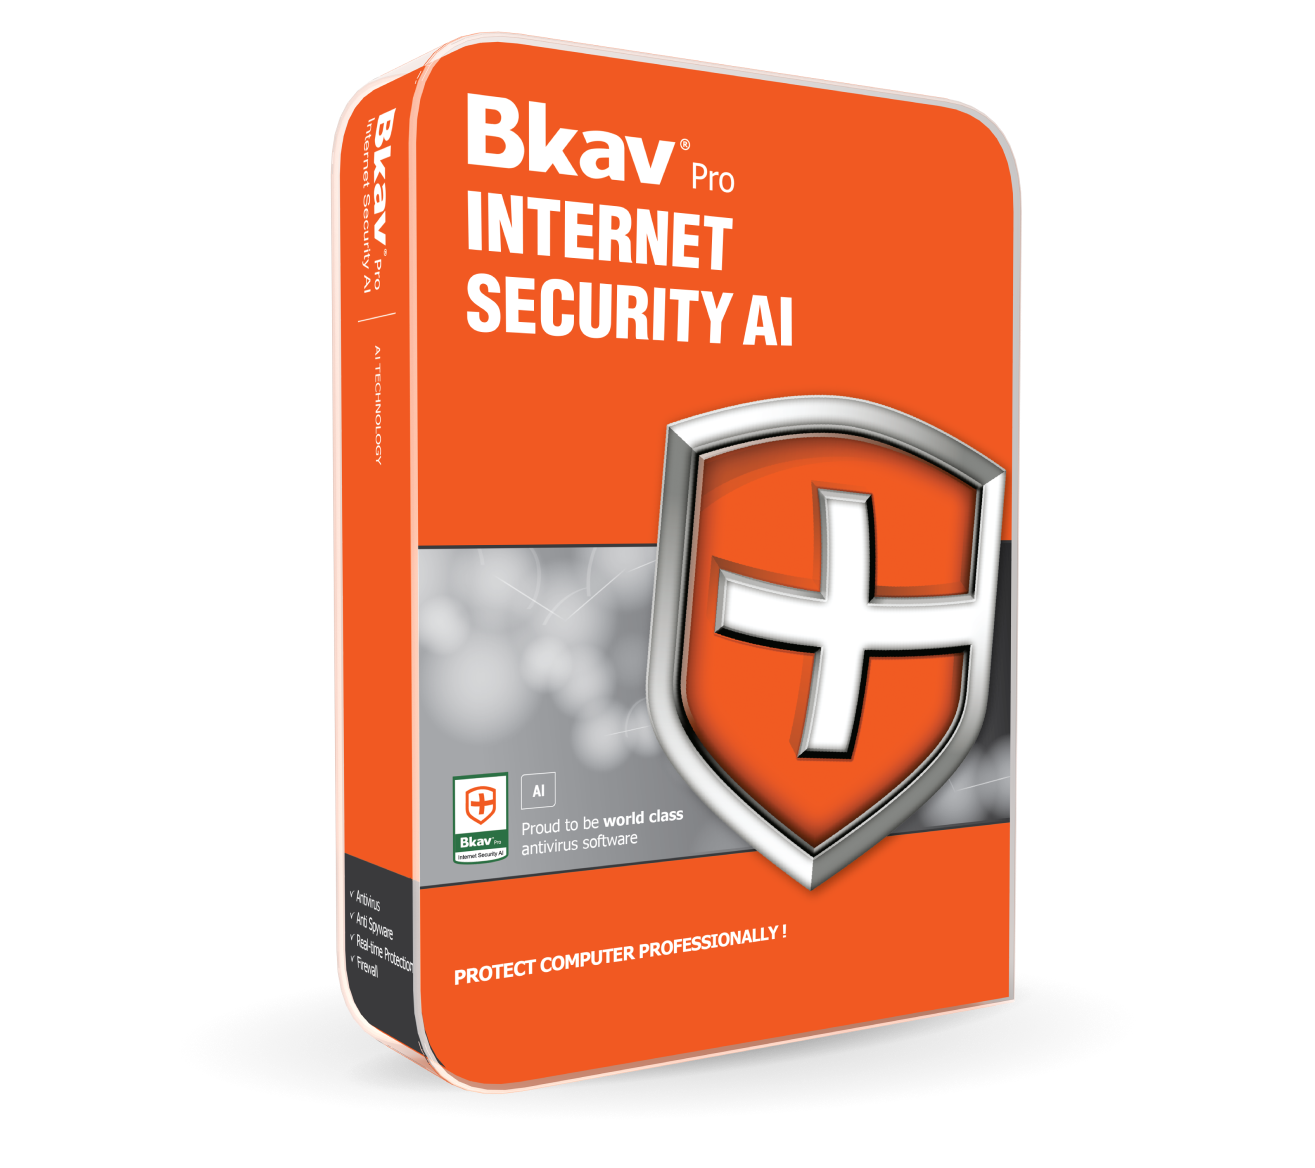 Antivirus software: BkavTool.exe is associated with Bkav Antivirus, an antivirus software developed by Bkav Corporation.
System optimization tools: Some system optimization tools may utilize BkavTool.exe as part of their functionality.